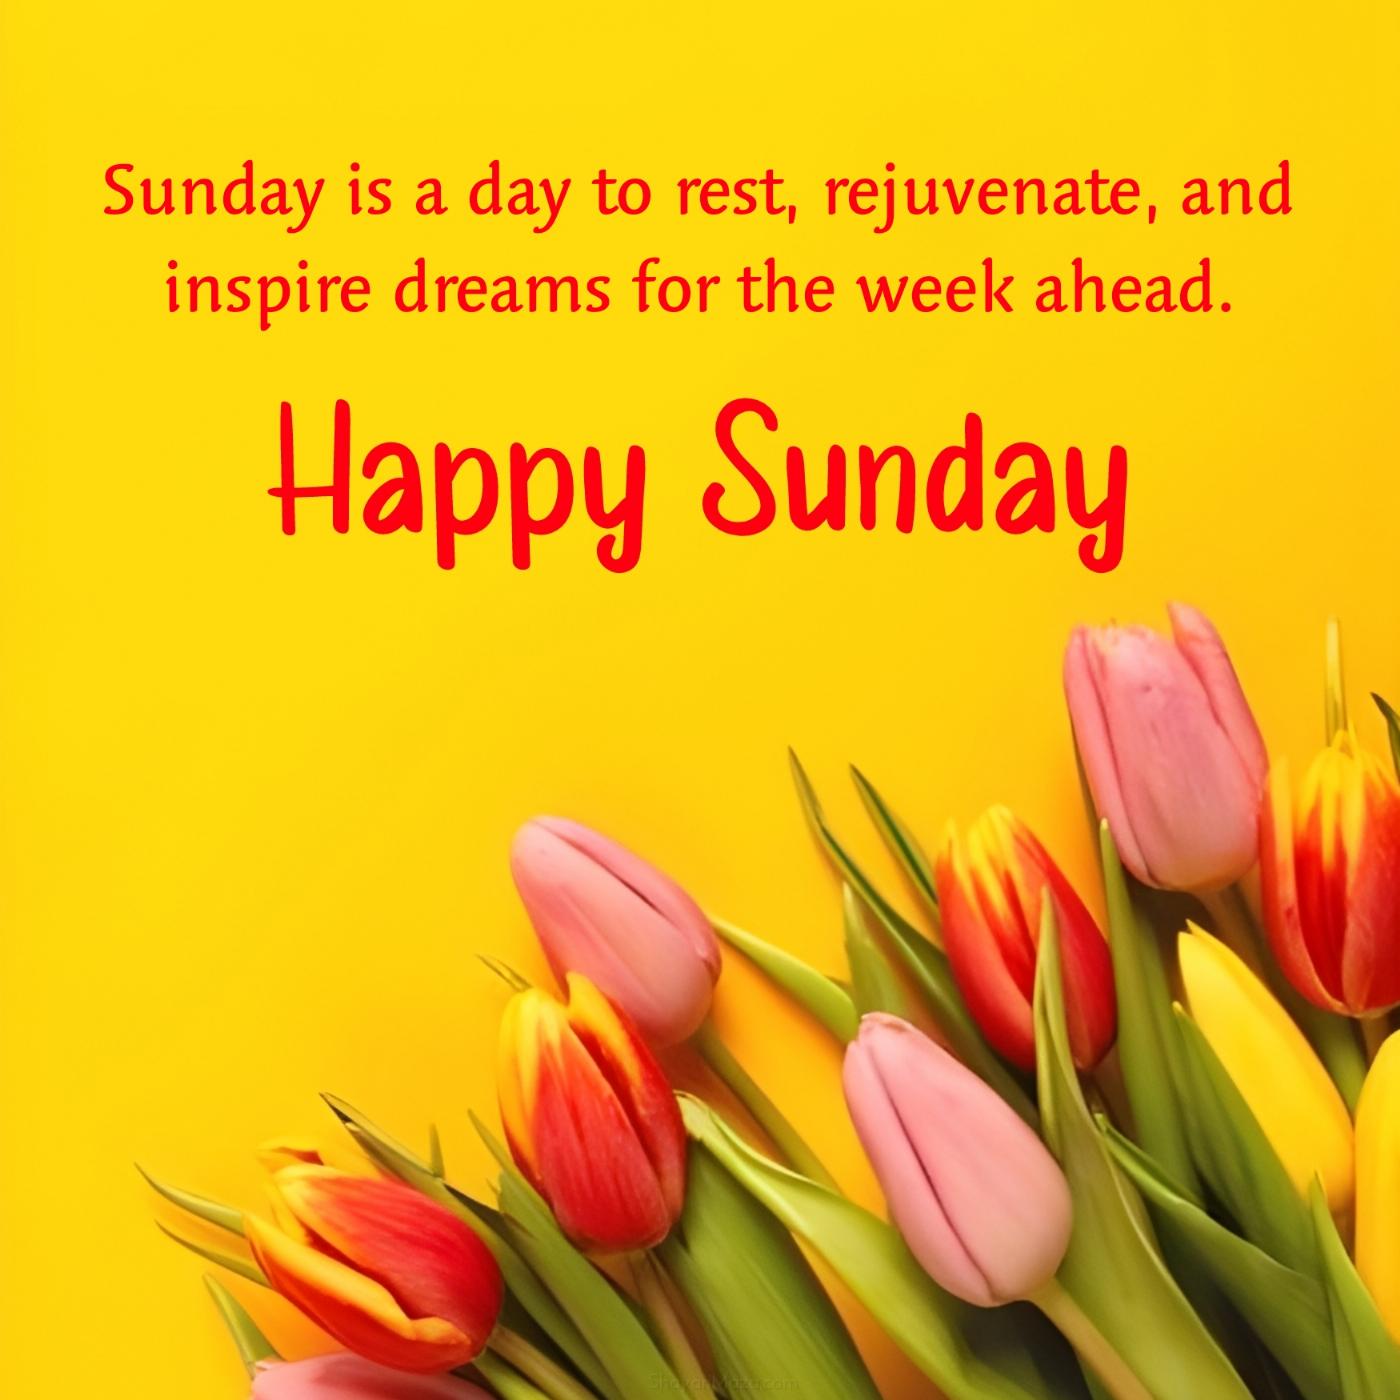 Sunday is a day to rest rejuvenate and inspire dreams for the week